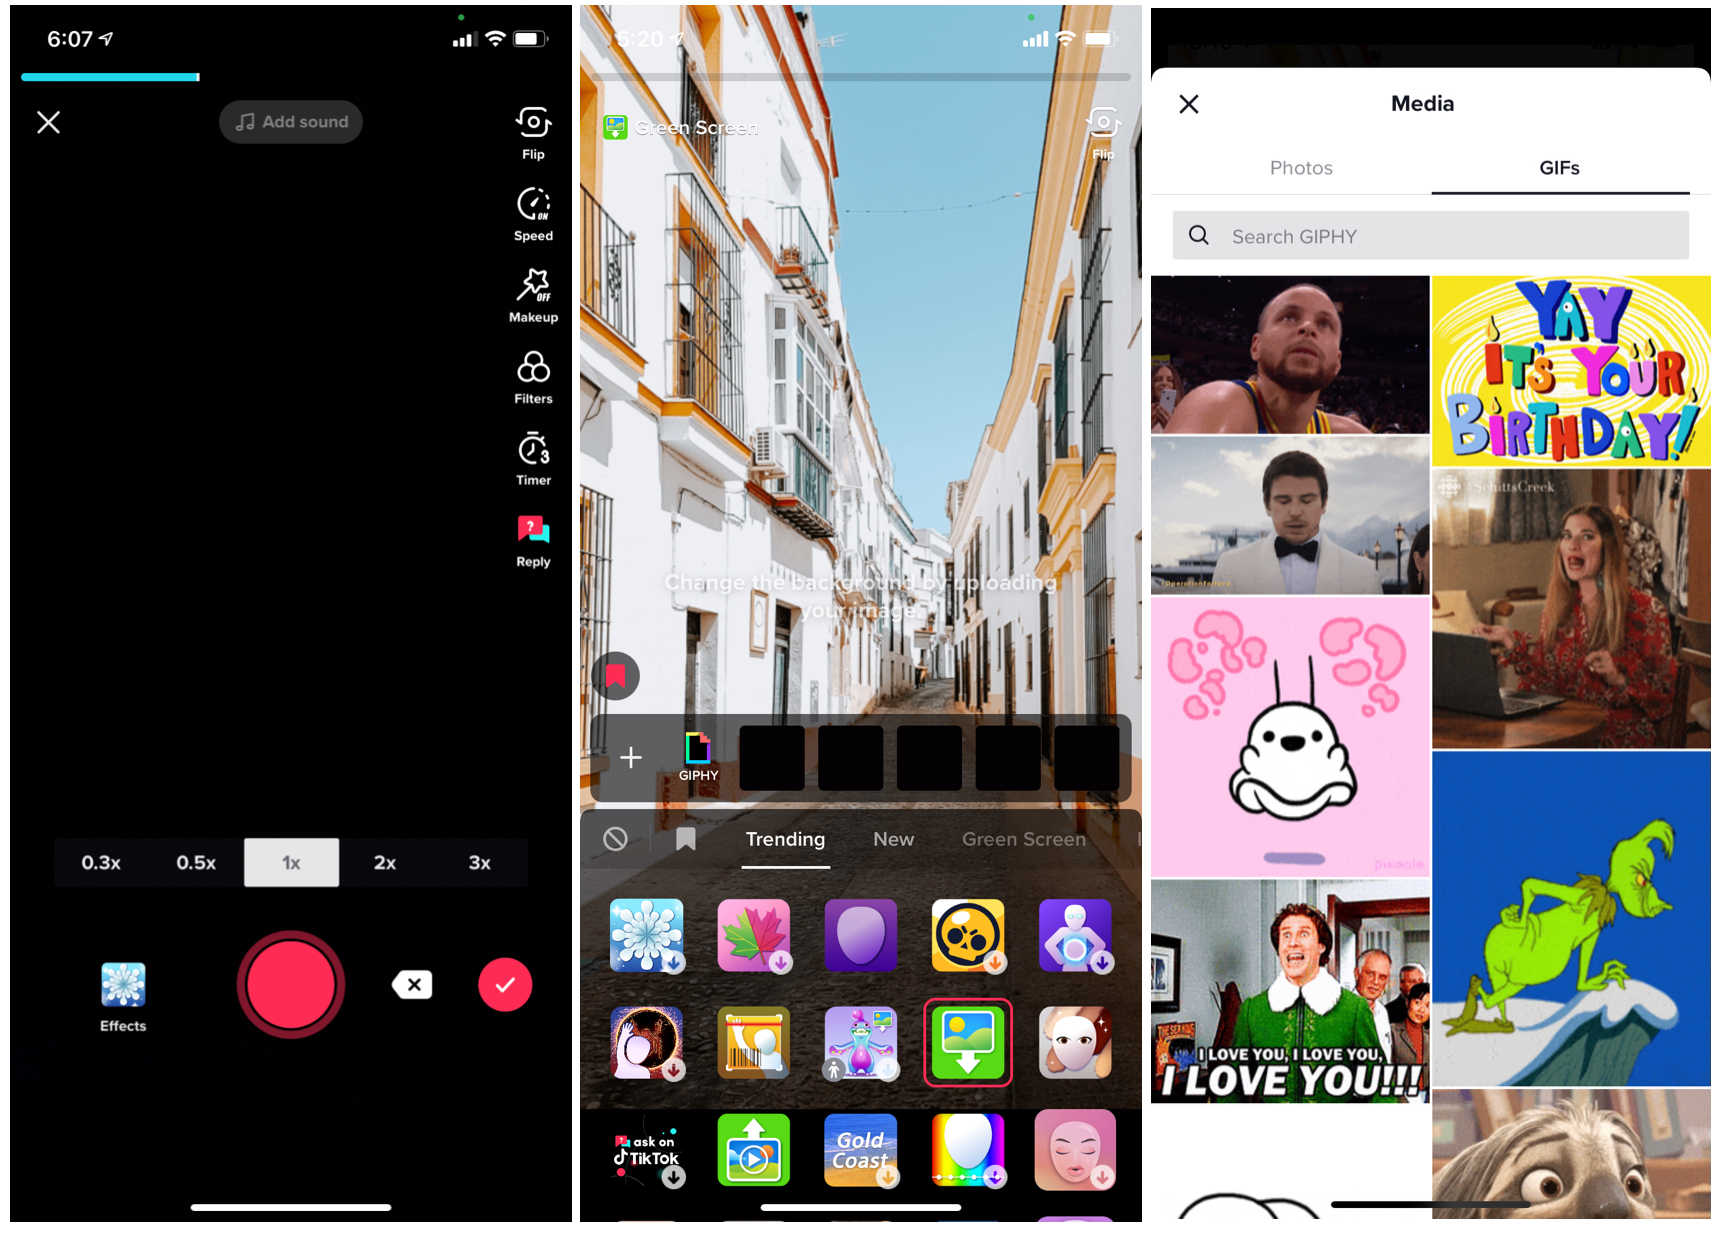 The best video editing tools and techniques for enhancing your TikTok videos